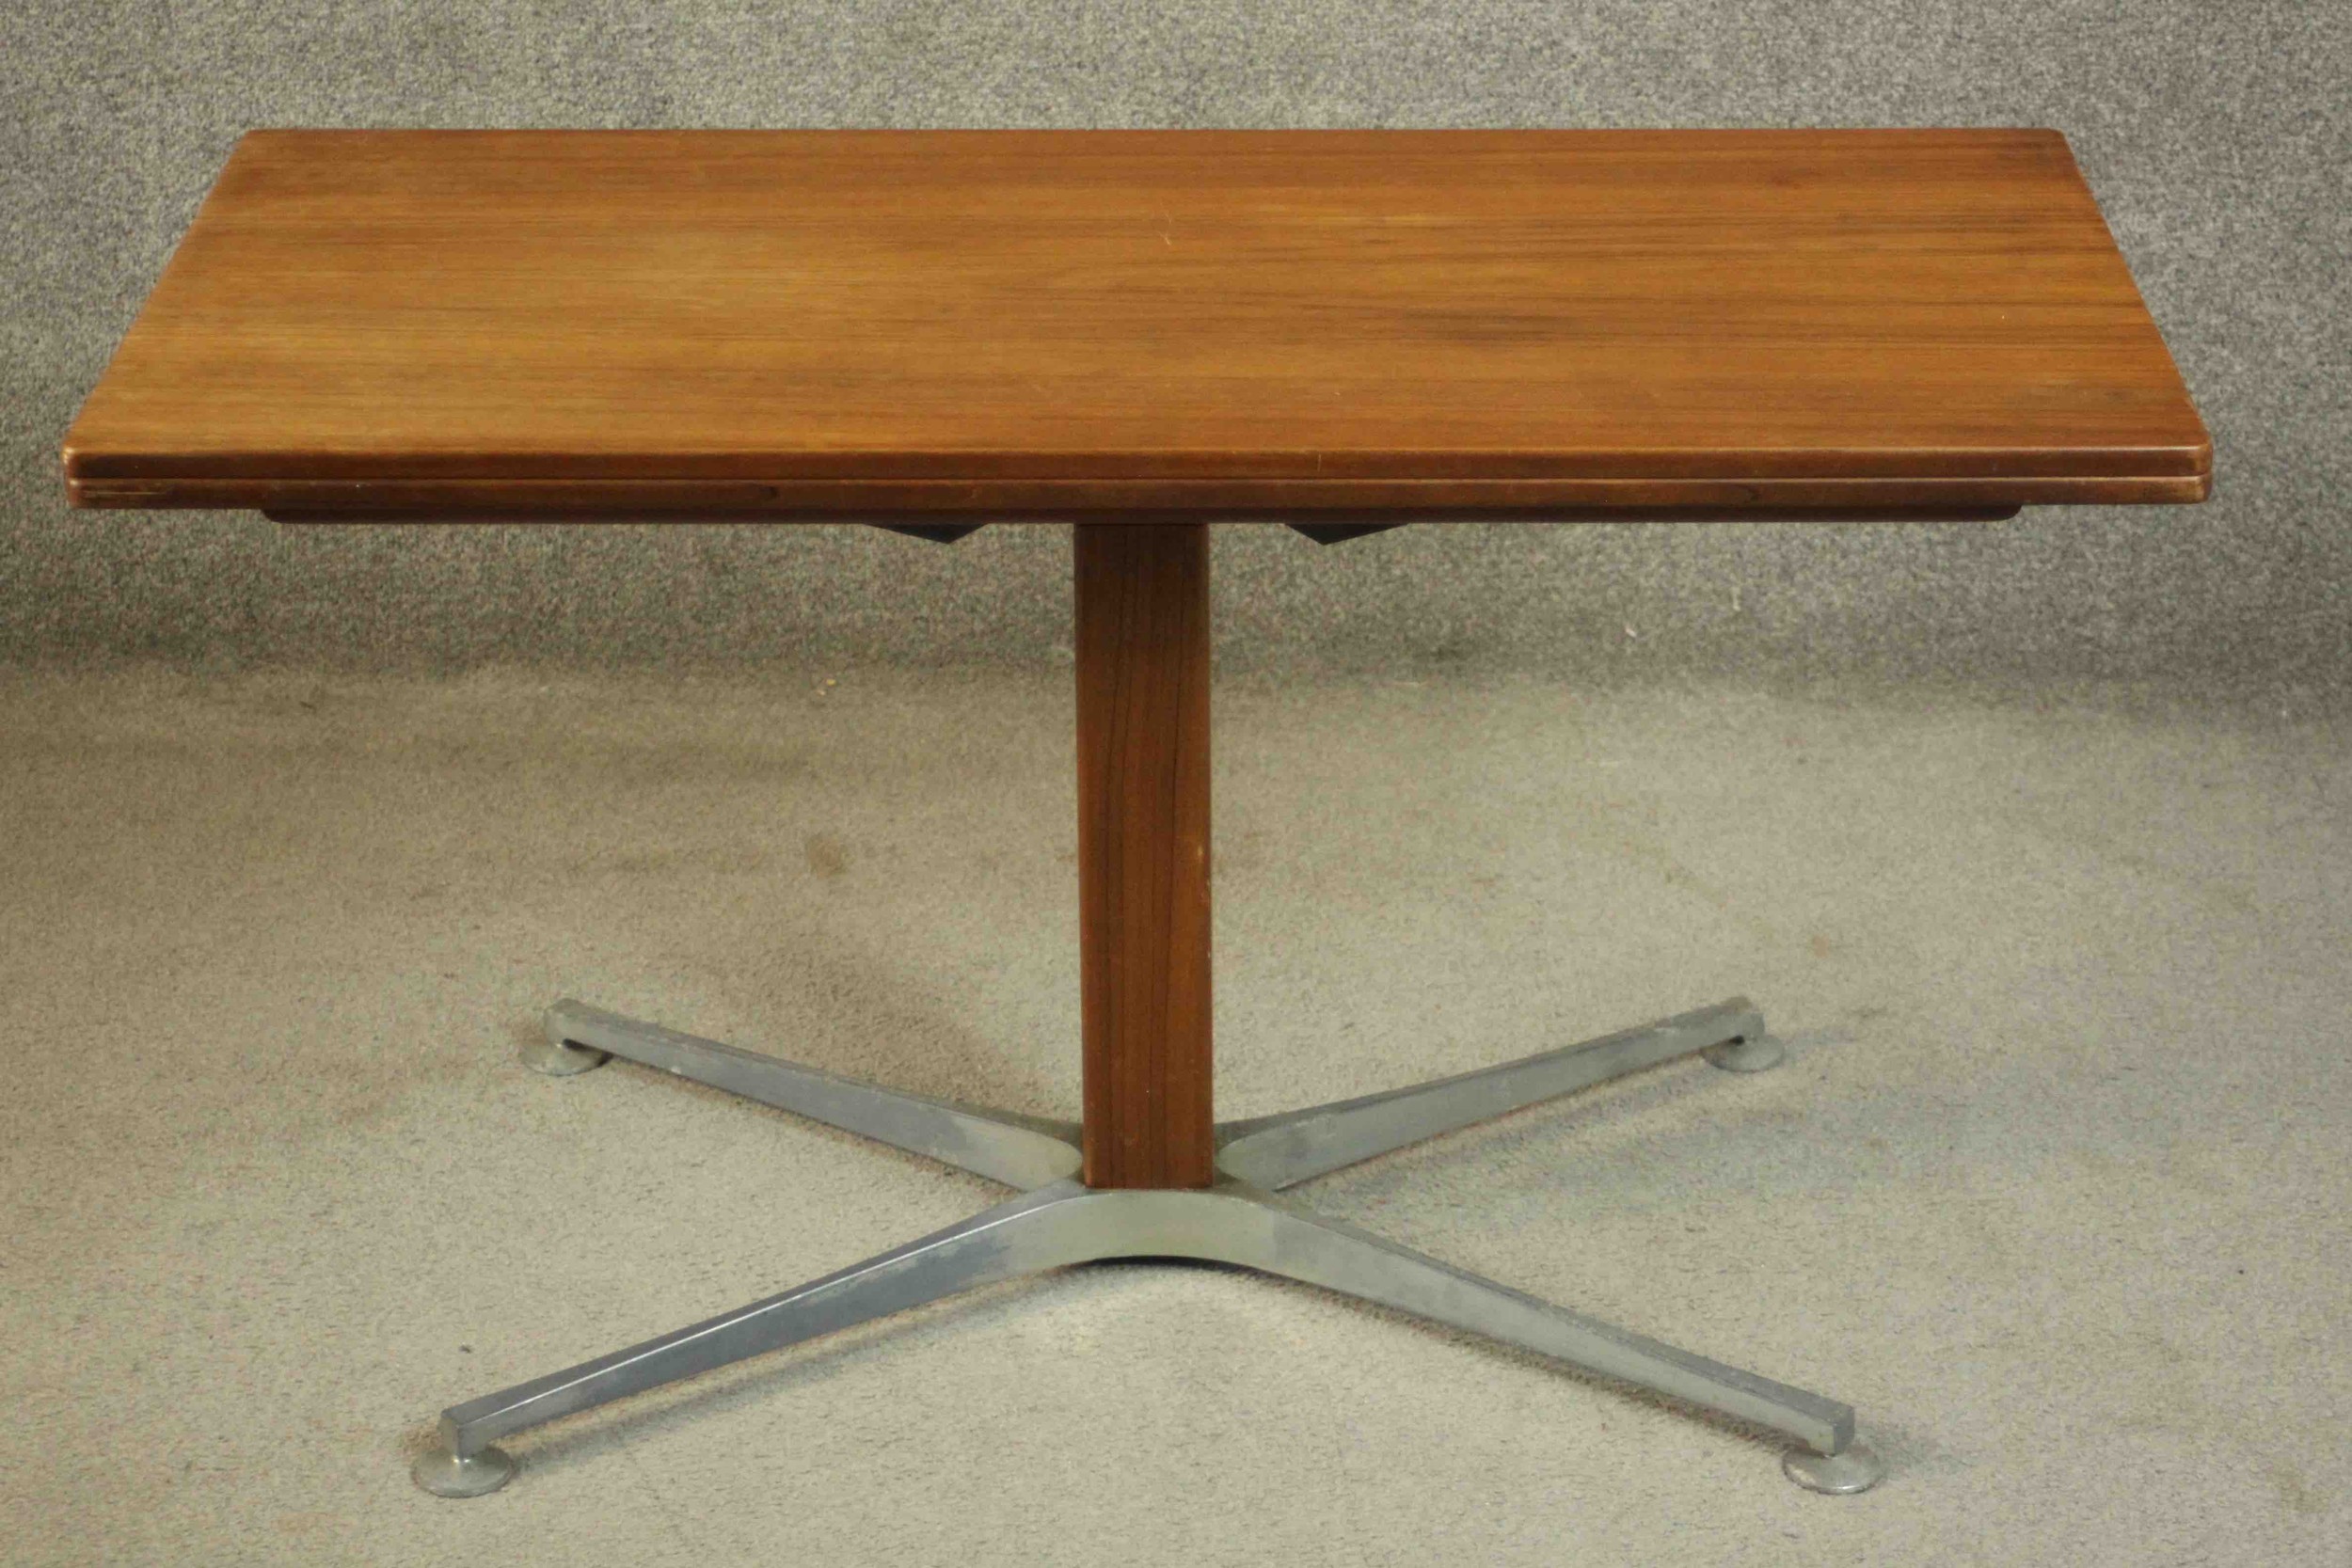 A vintage teak fold over console table converting to dining table with height adjustable mechanism